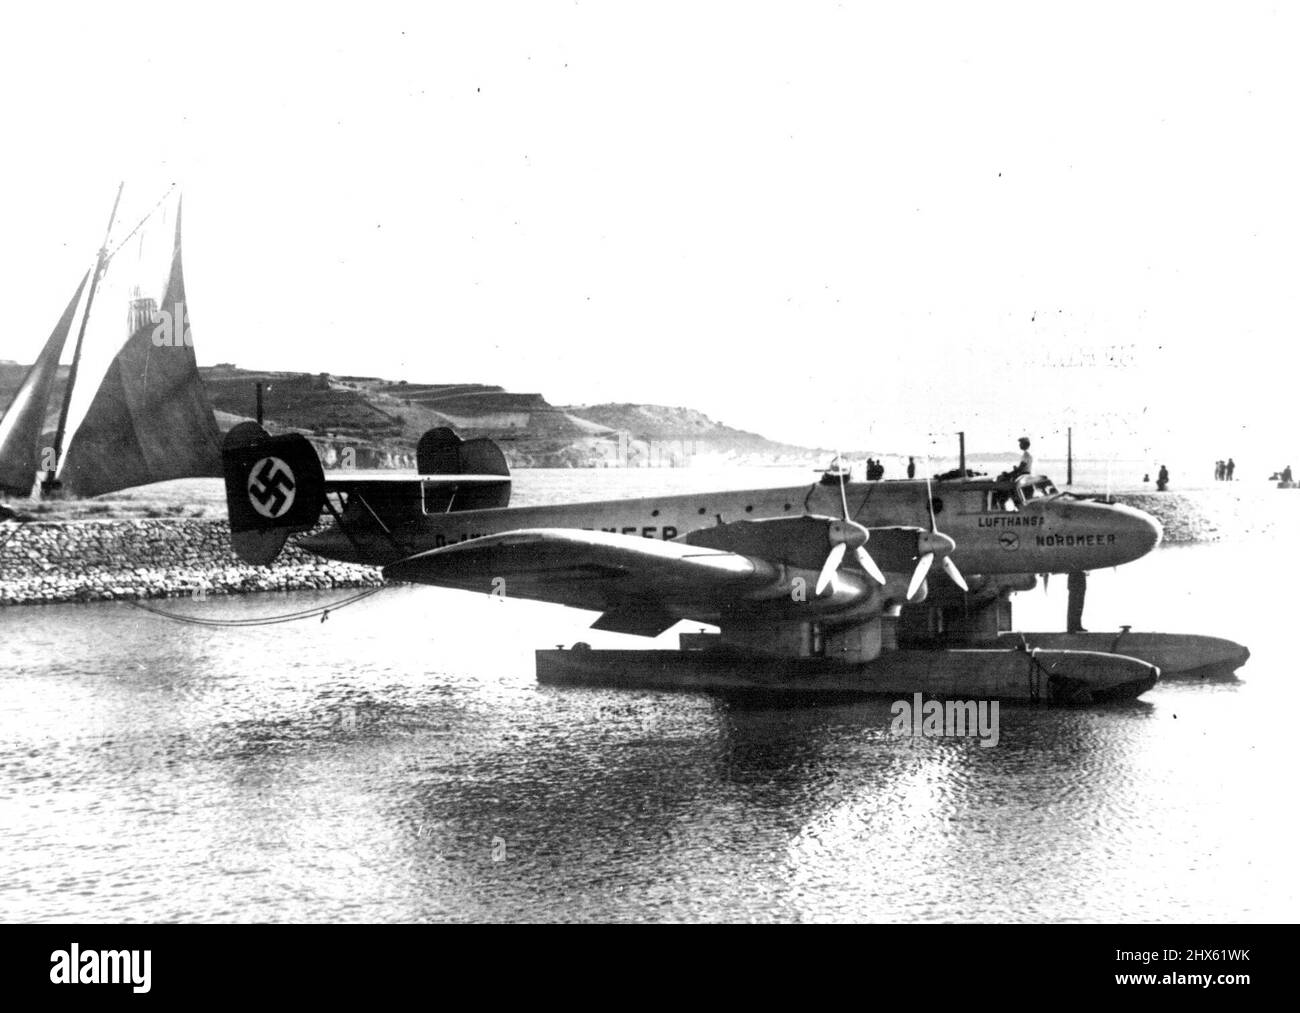 United States Air Service -- The German four-engined 'Nordemeer' arrived Lisbon, and left there at 10 O'clock for Horta (Azora ***** with its Commander the Airman Blackenburg, Comte de victories Federation, the pilot, Count Schack, Flight Captain von Buddenrock, a wireless operator, a mechanic and the Portuguese Wing Commander Carlos Beja, representing the Portuguese Government. From Horta, the 'Nordmeer' will be catapulted by the S.S. 'Frizenlands' on her journey to the U.S.A. On the return jou Stock Photo